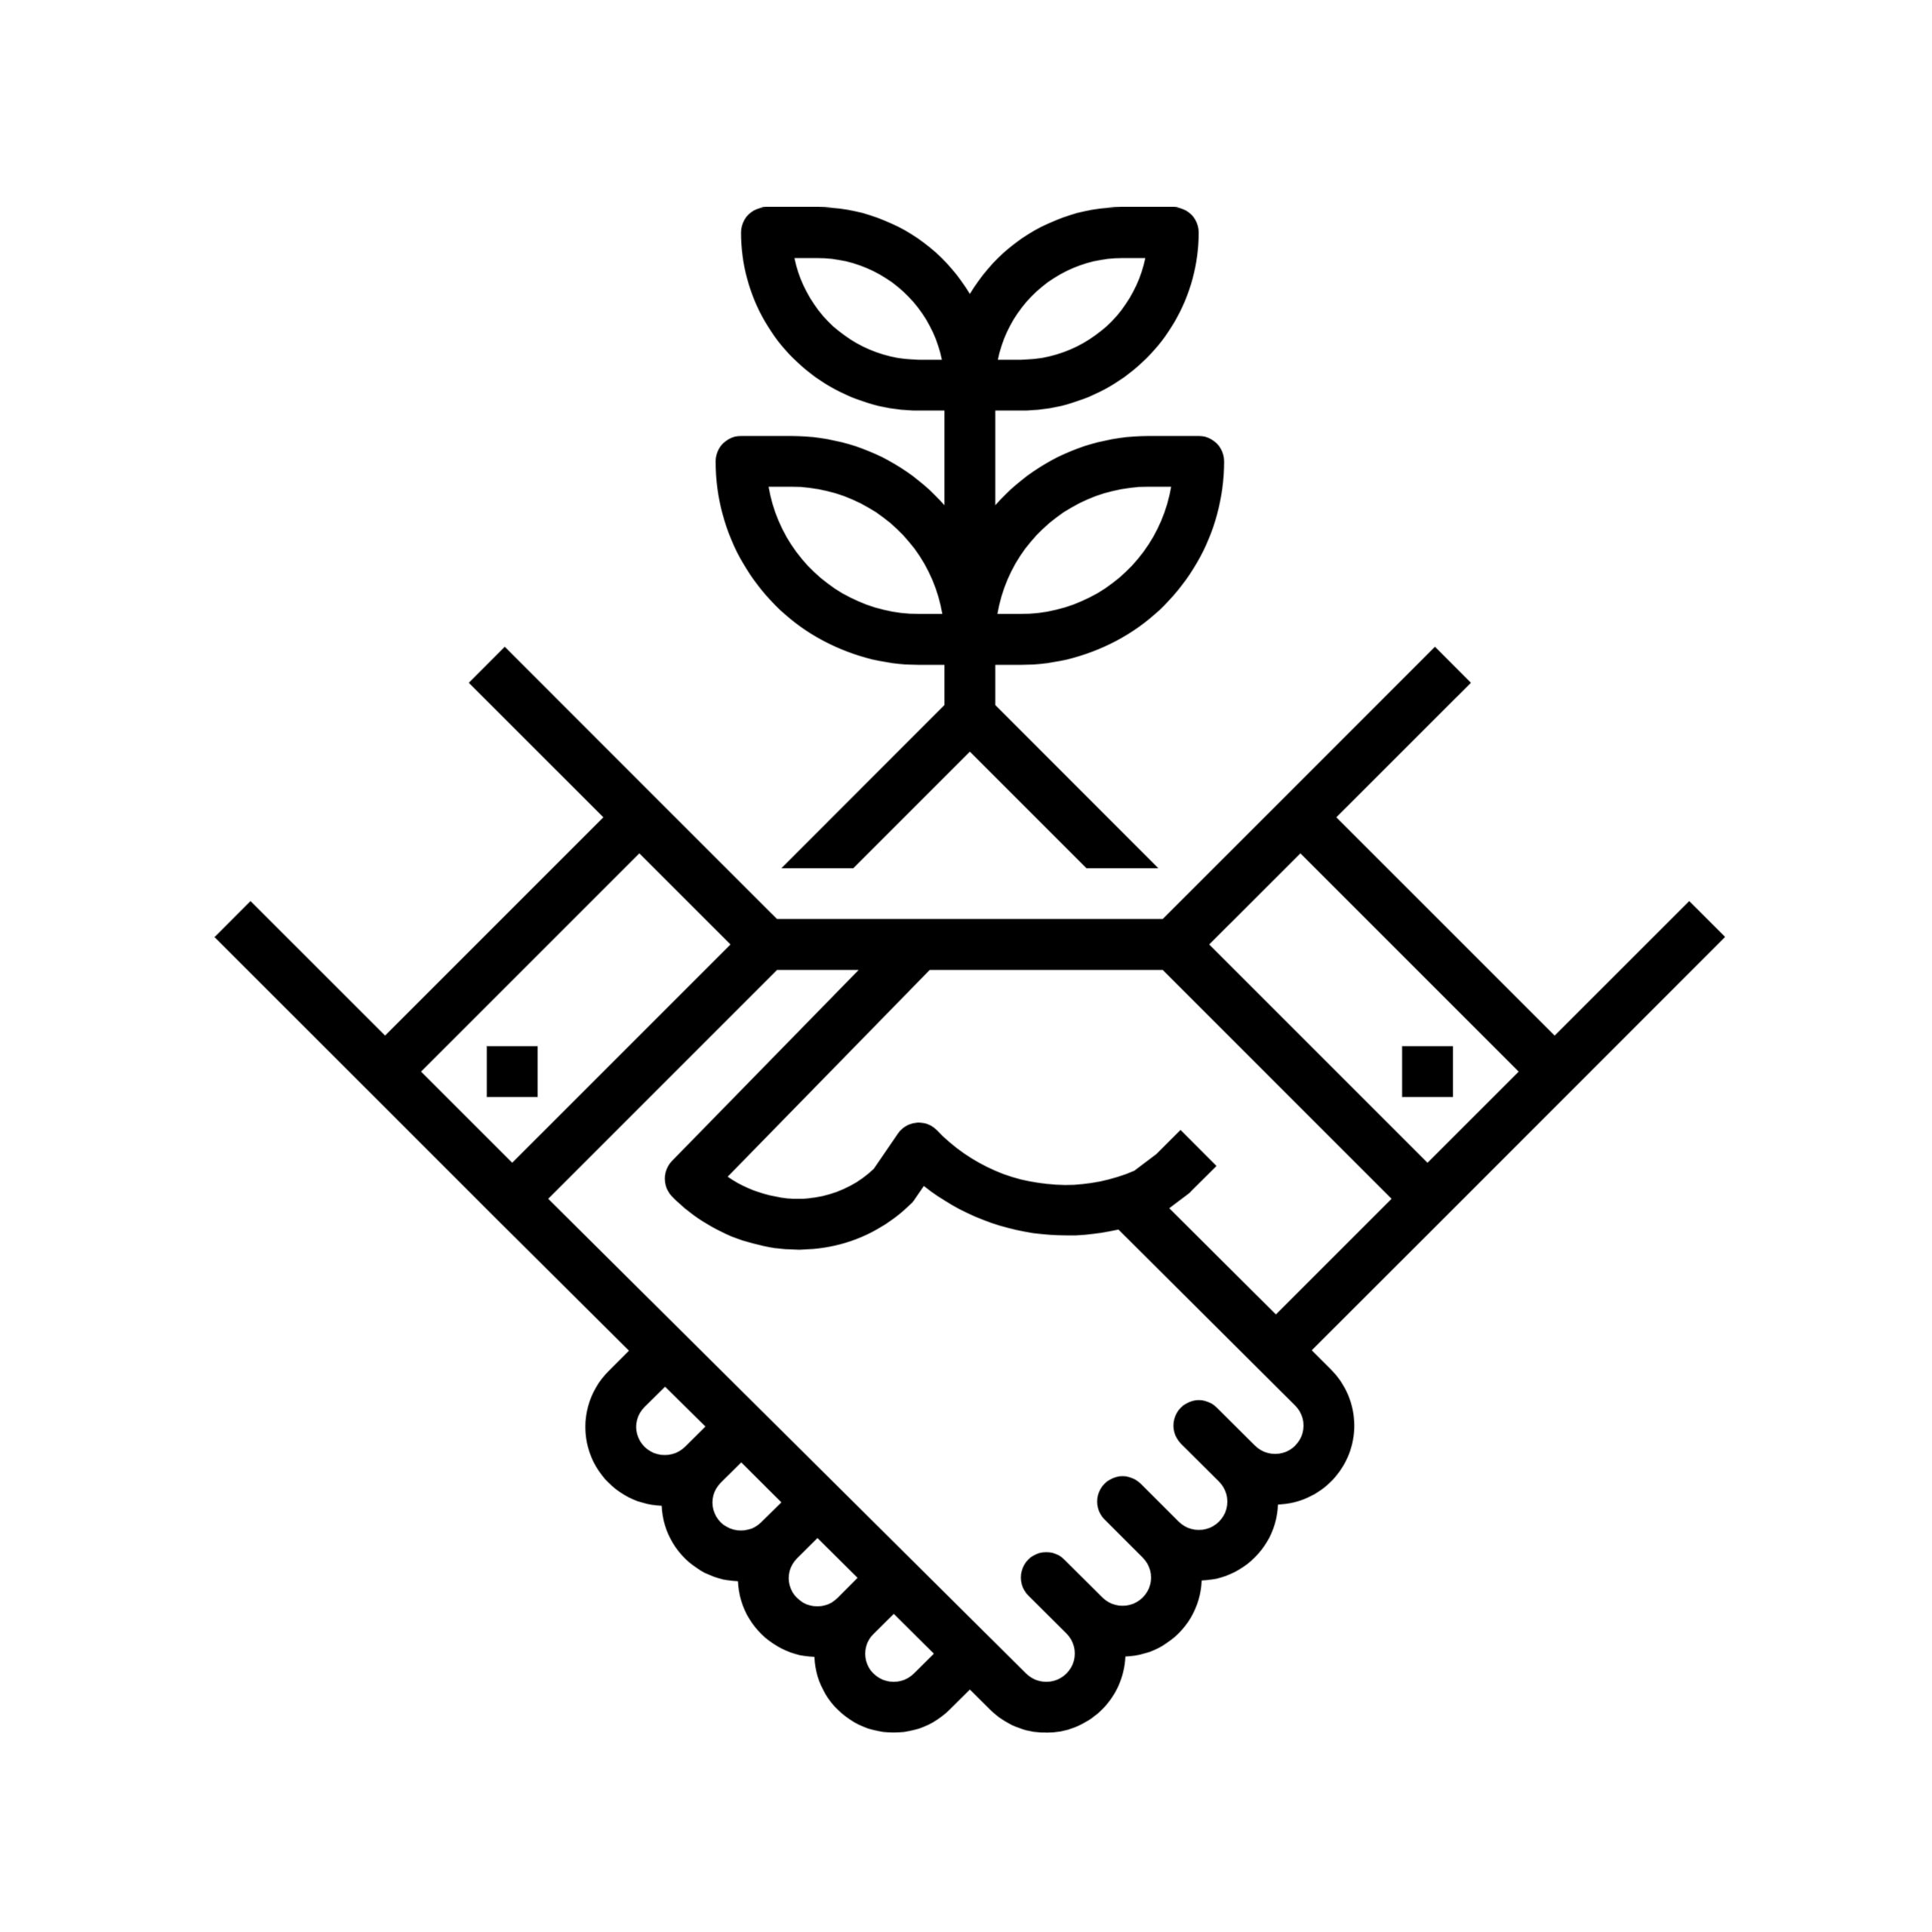 icon of a handshake, a plant sprouts from between the two hands